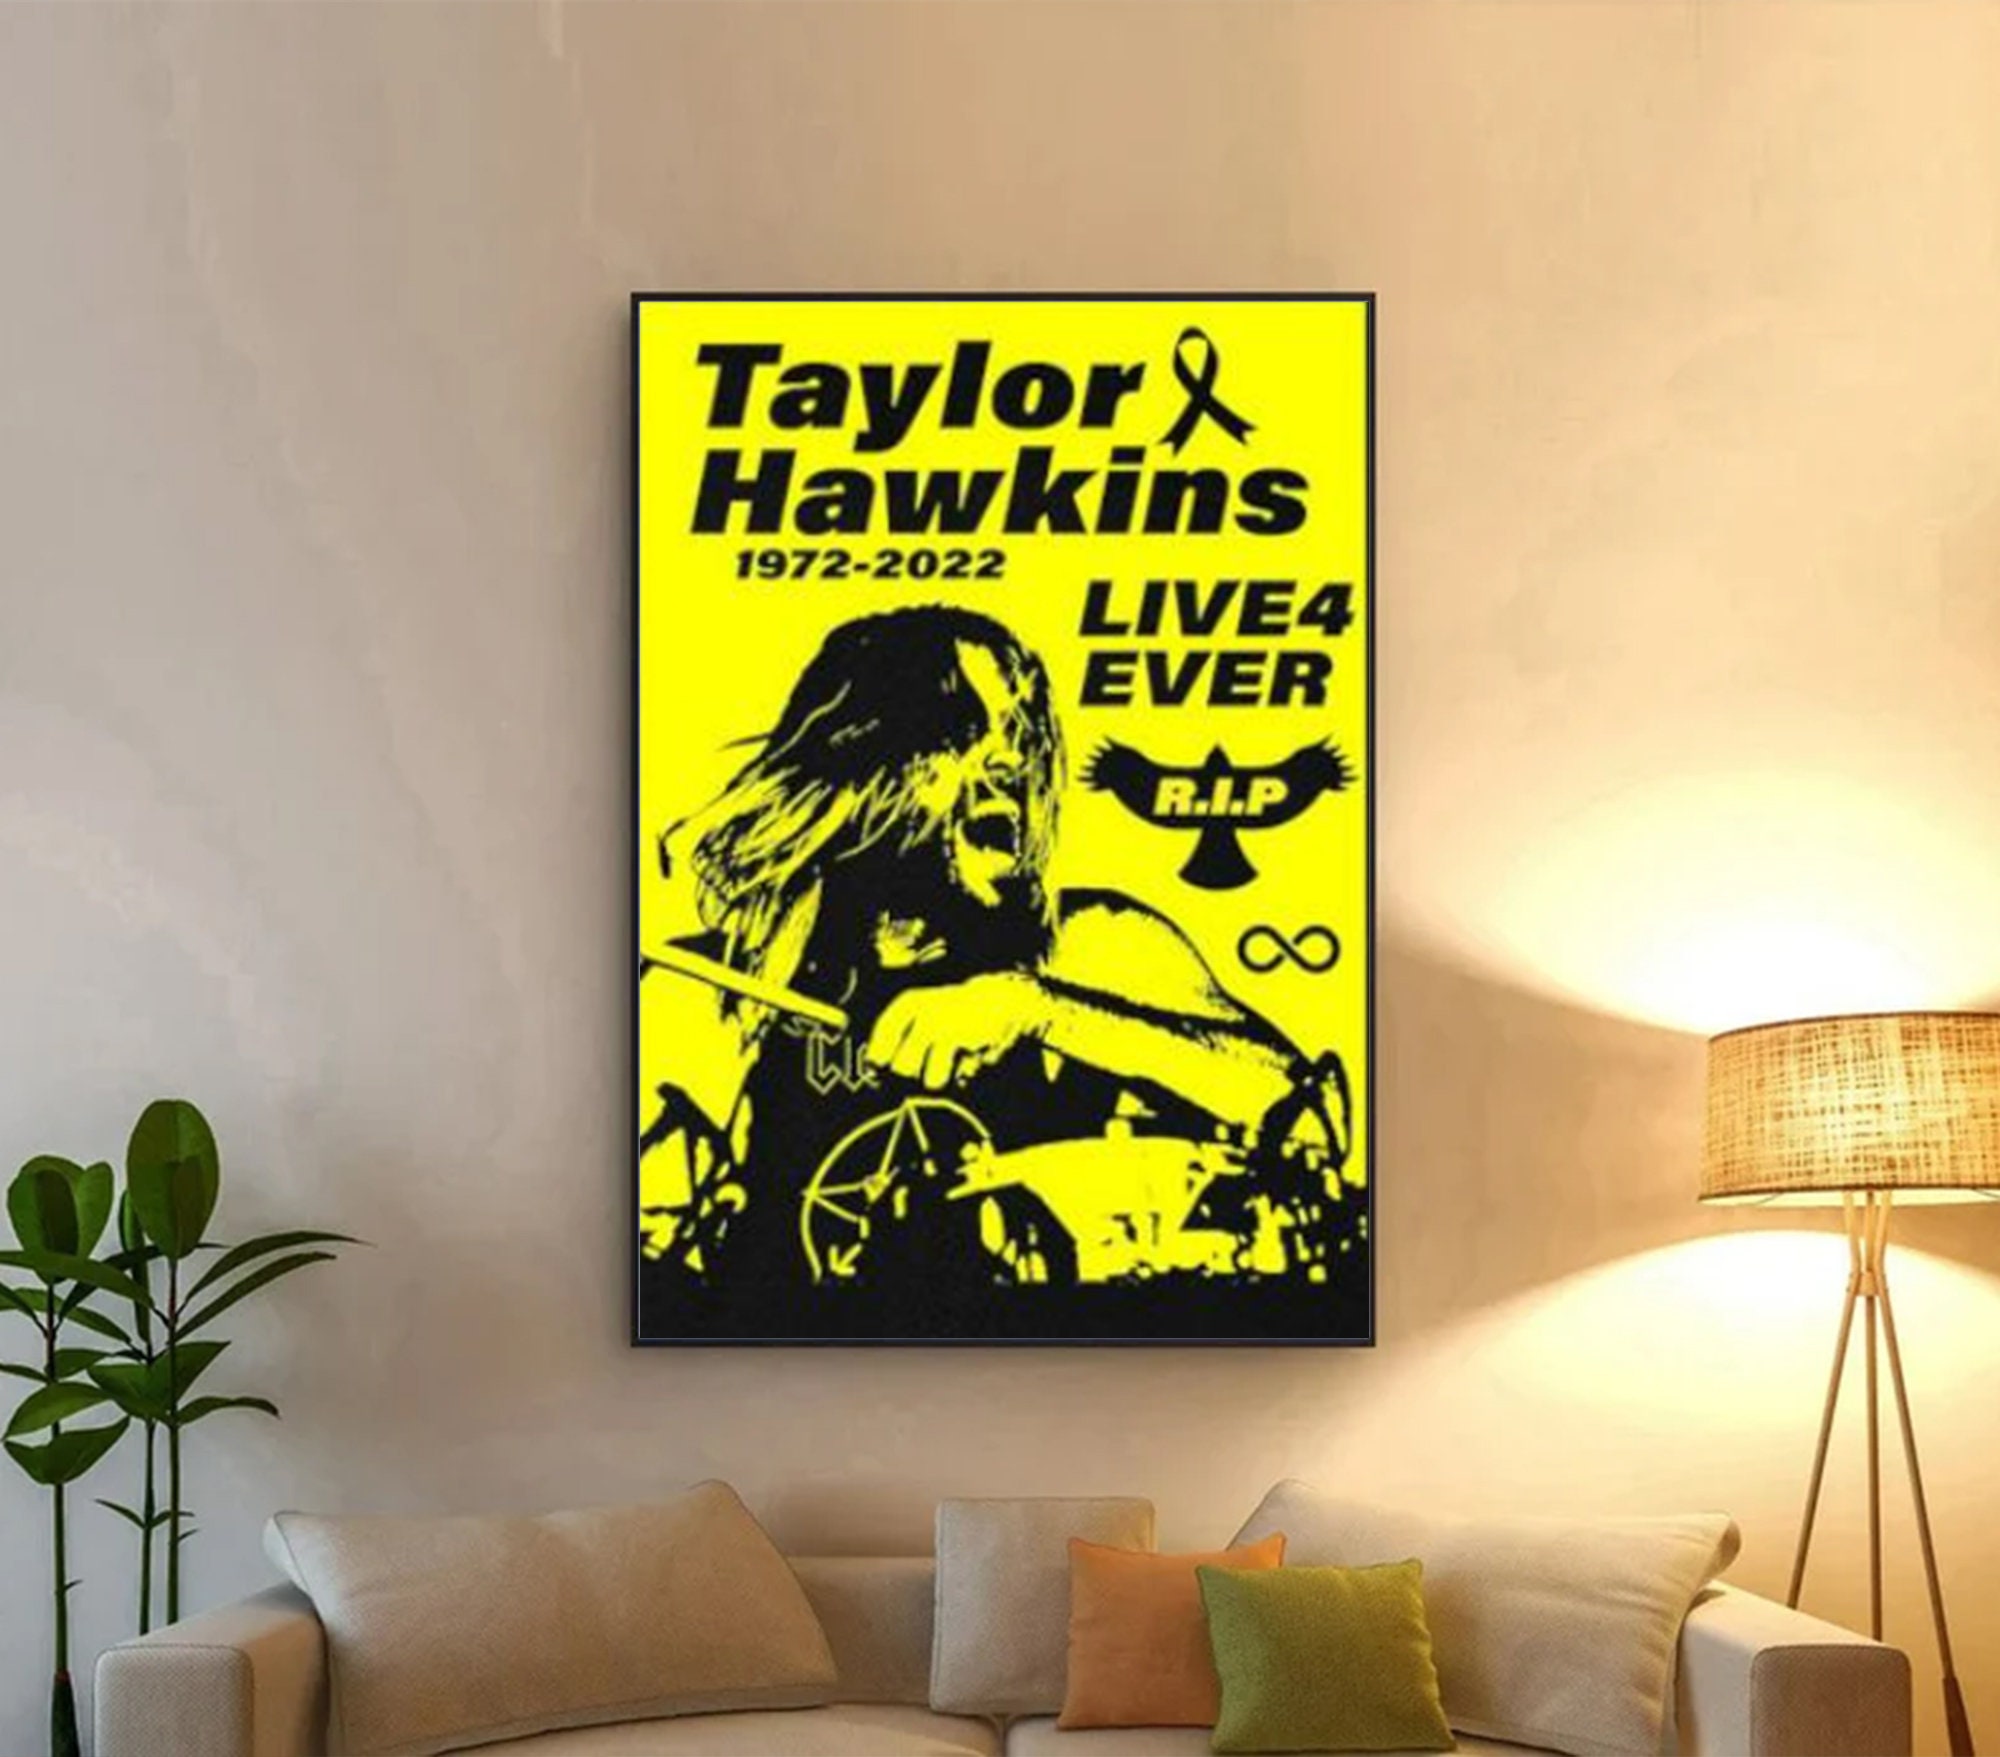 Taylor Hawkins Live4 Ever Poster Canvas